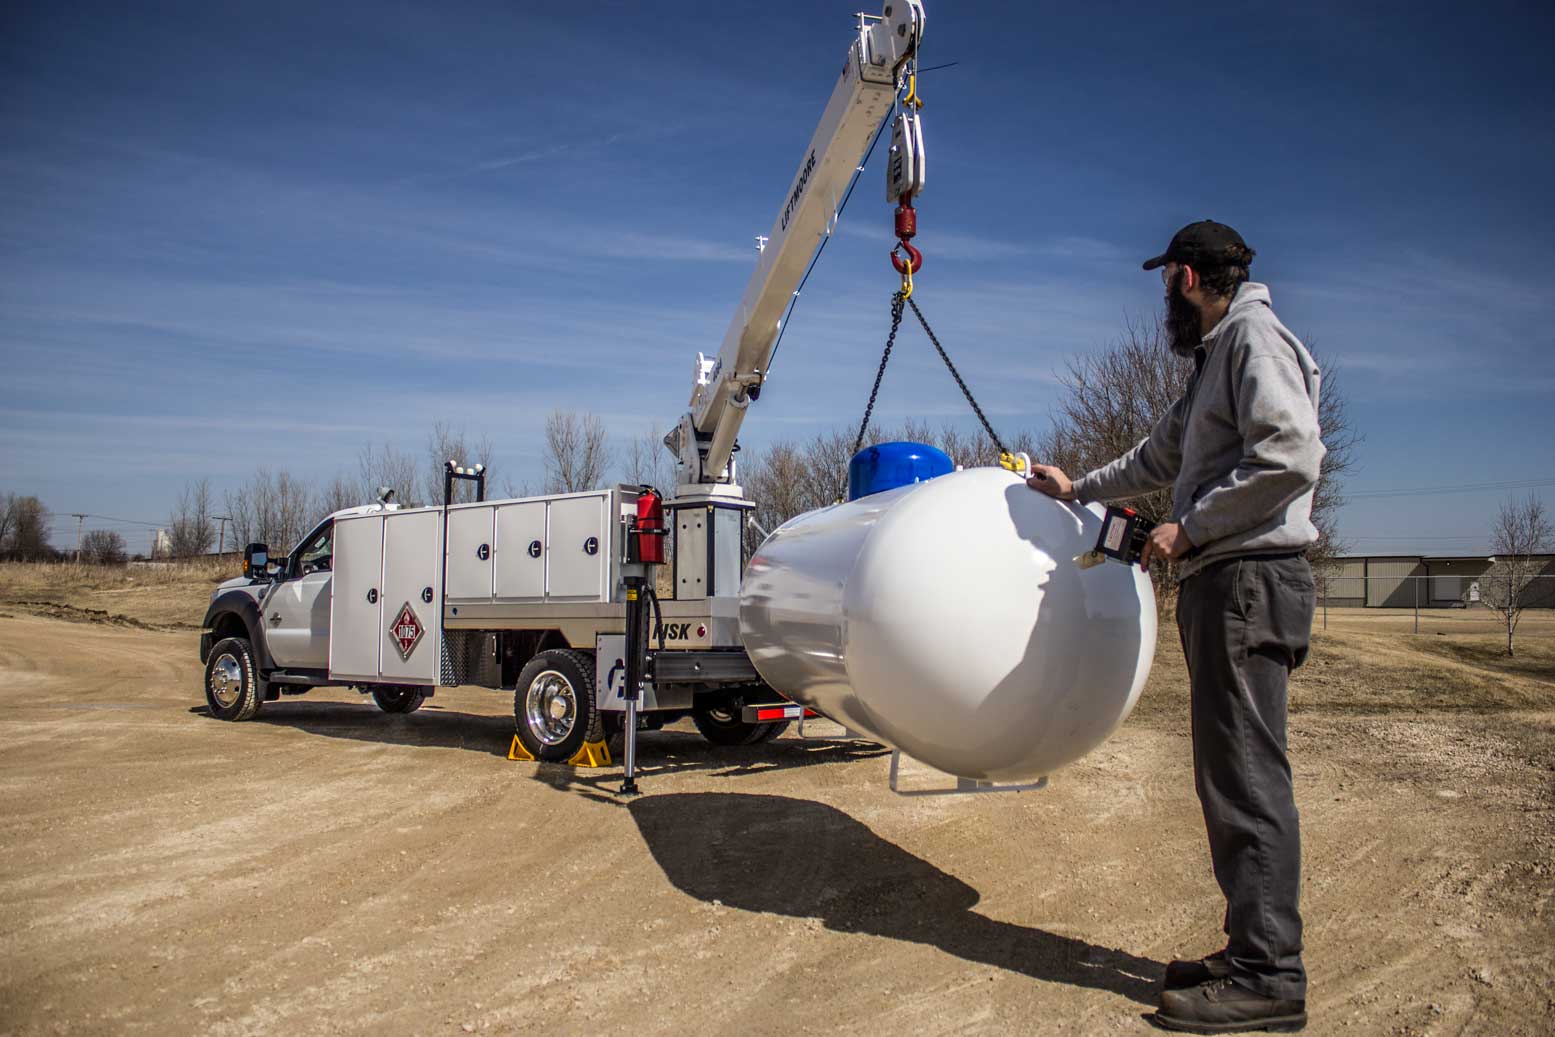 Serviceman lifting a propane tank with boom truck